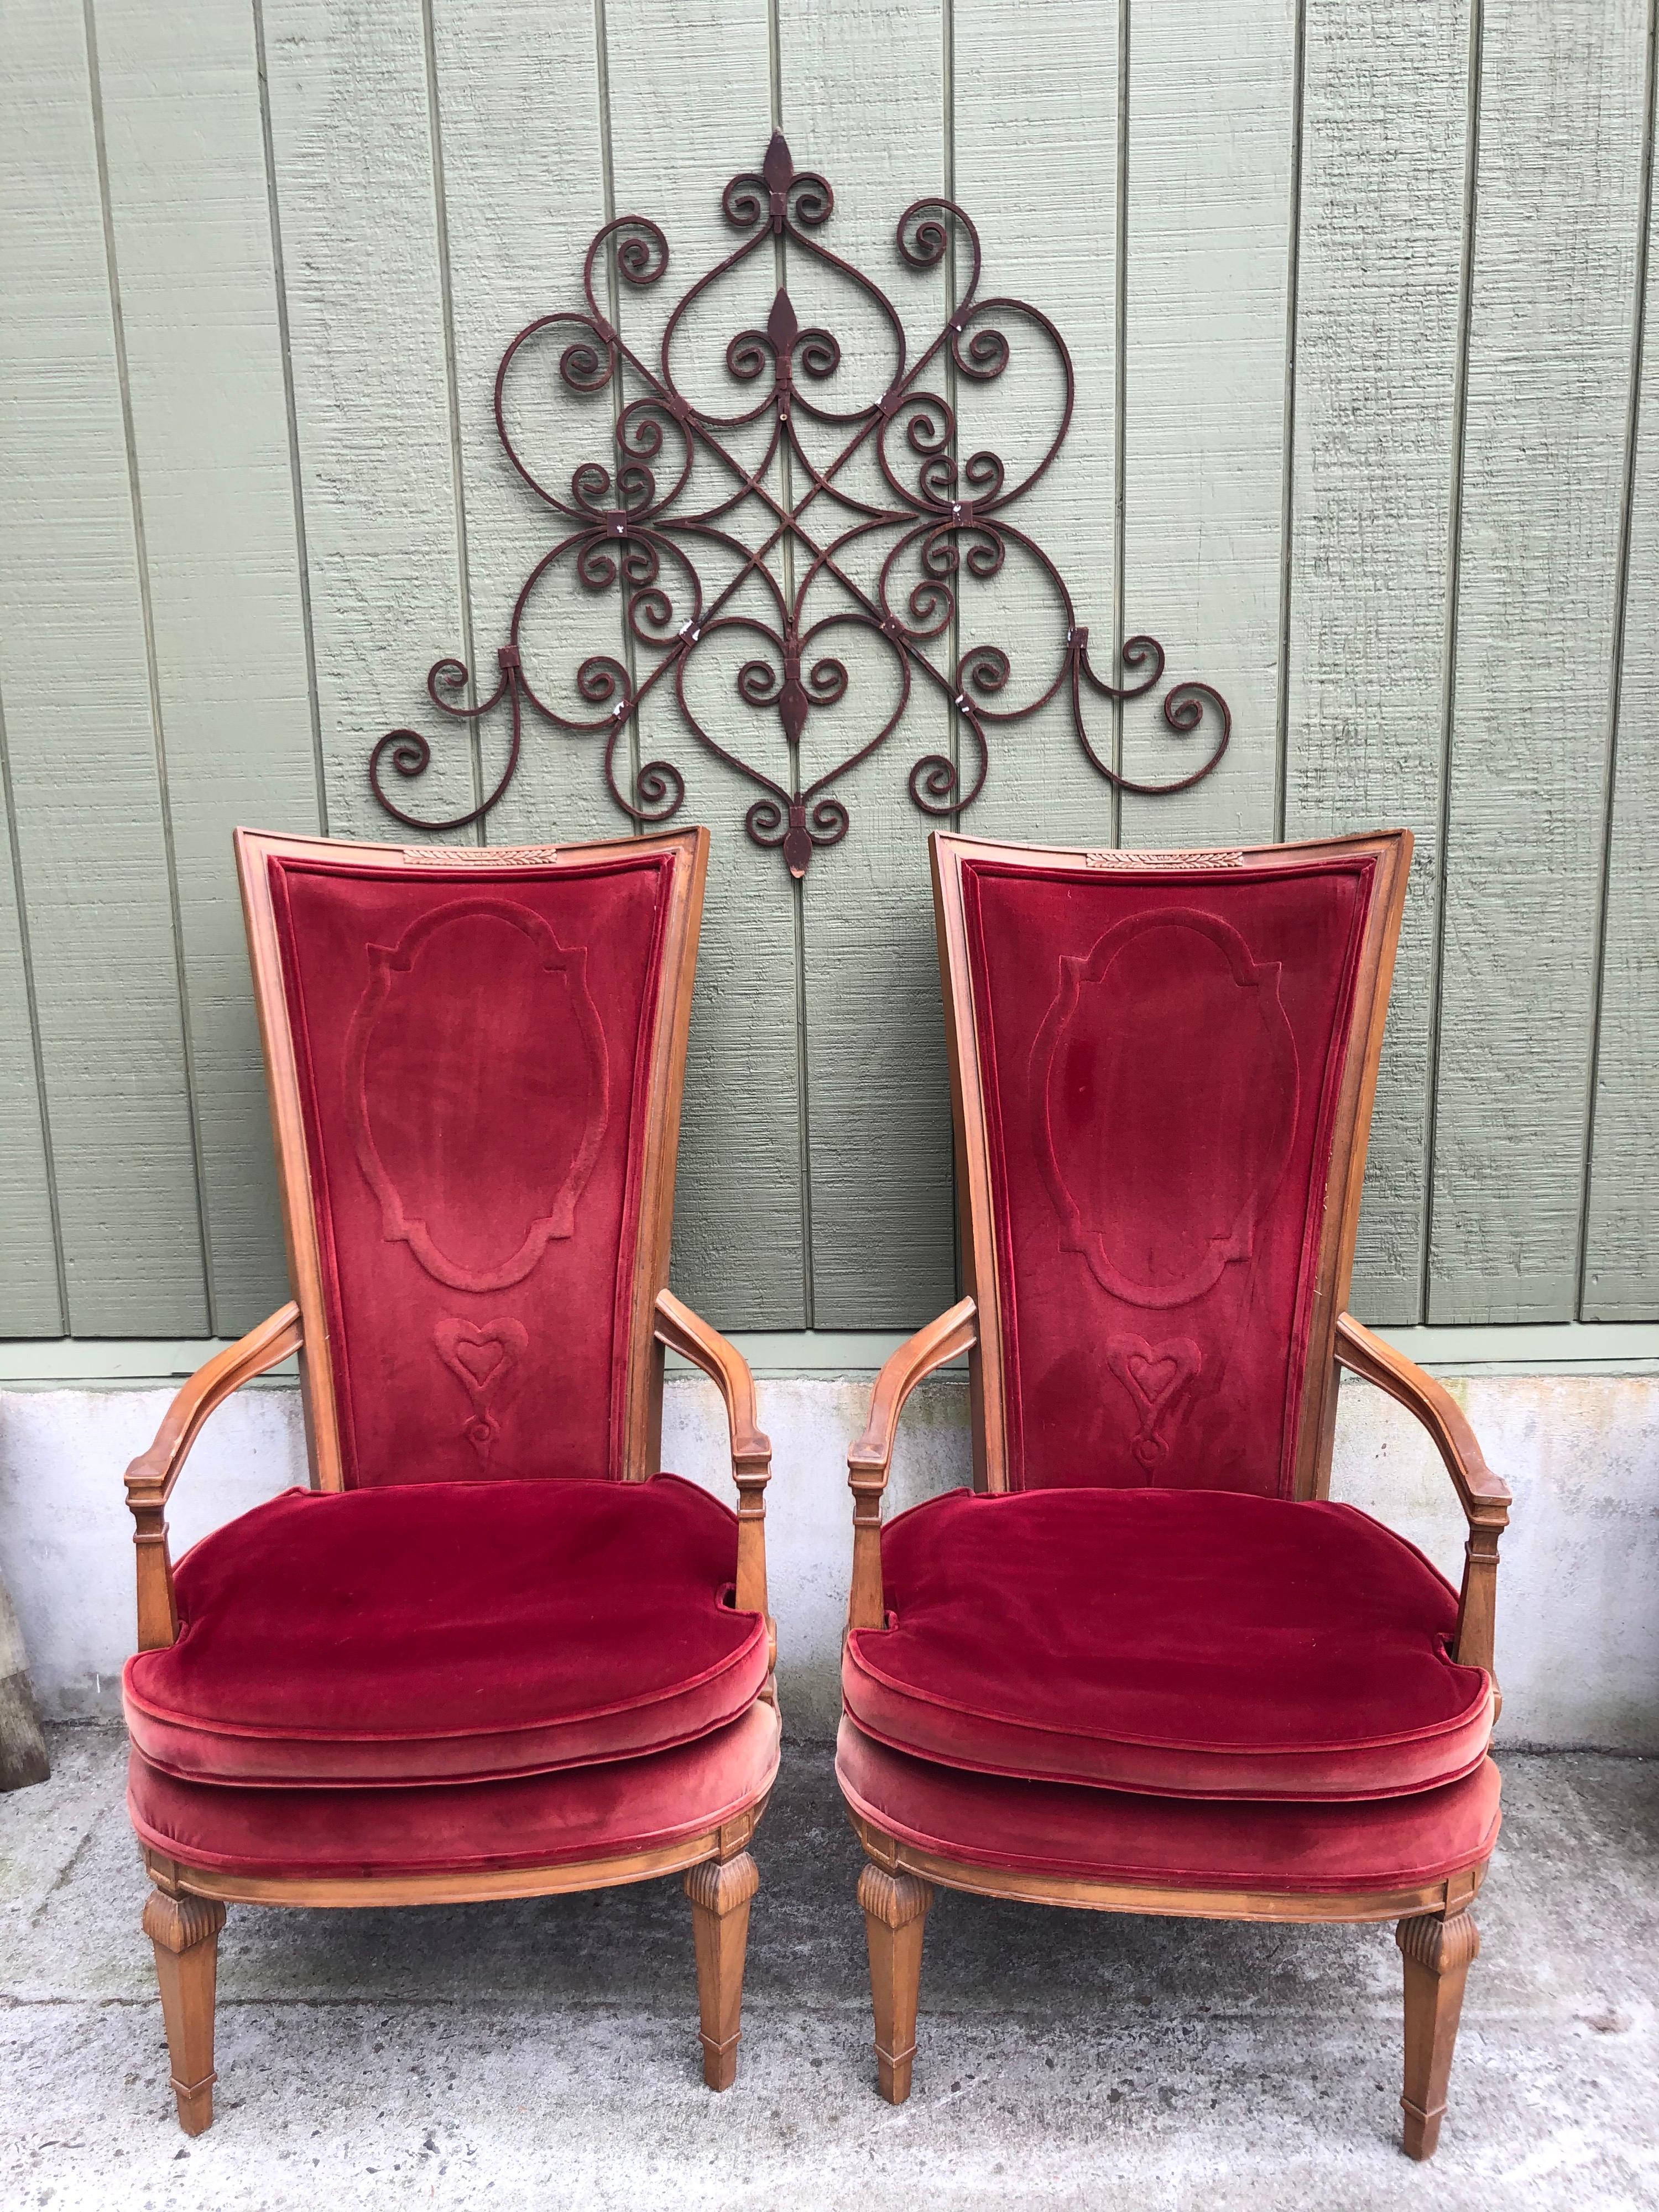 Pair of red velvet Hollywood Regency highback chairs. High glamour appeal to these his and hers throne chairs. Note the quilted red hearts in the velvet design. Show the love for your valentine with these beauties.